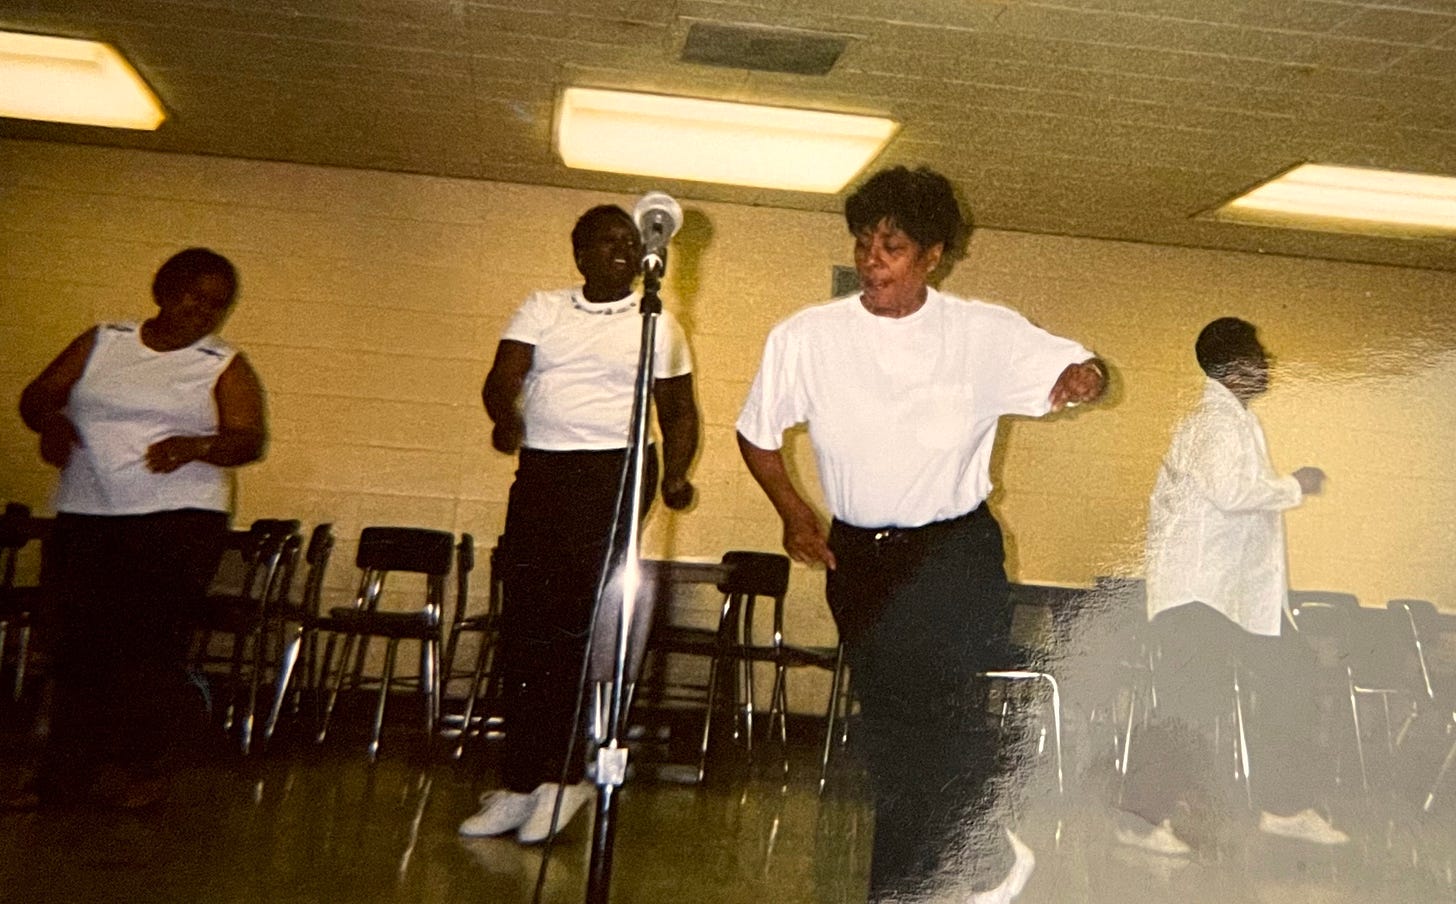 Jemar's mom dancing in black jeans and a white t-shirt along with three other women in the background